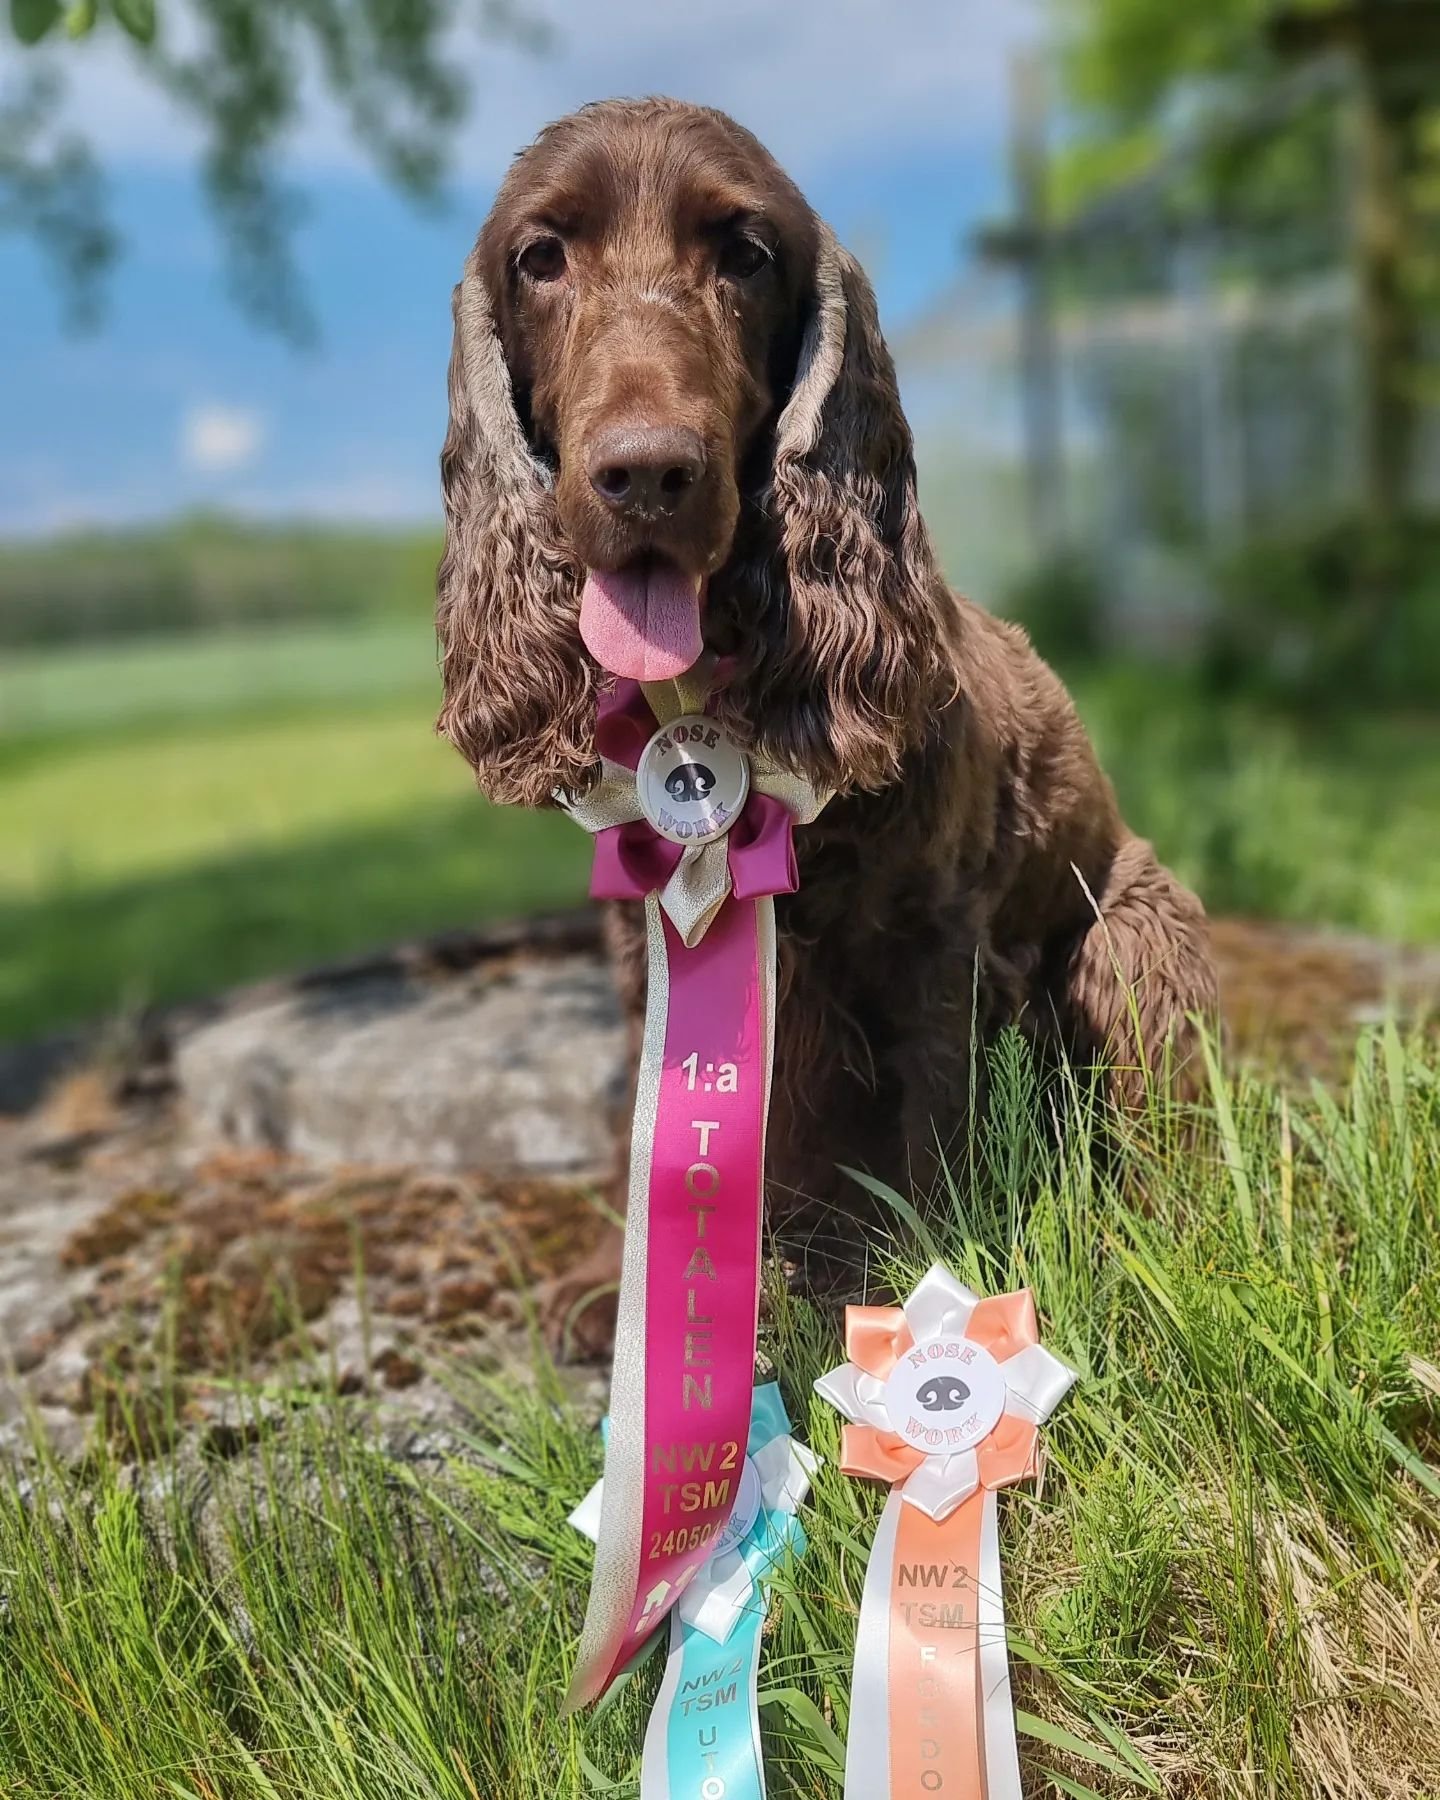 Today, our prizes came and Ginnie could have her victory picture 🎉 

NW2 TSM, Bua hamn, 1st of May. 

🥇1st place overall🥇
100 pts, 0 zero faults and her 2nd diploma in NW2. 

We also acheieved:
🥇1st place vehicle search
🥈2nd place exterior searc